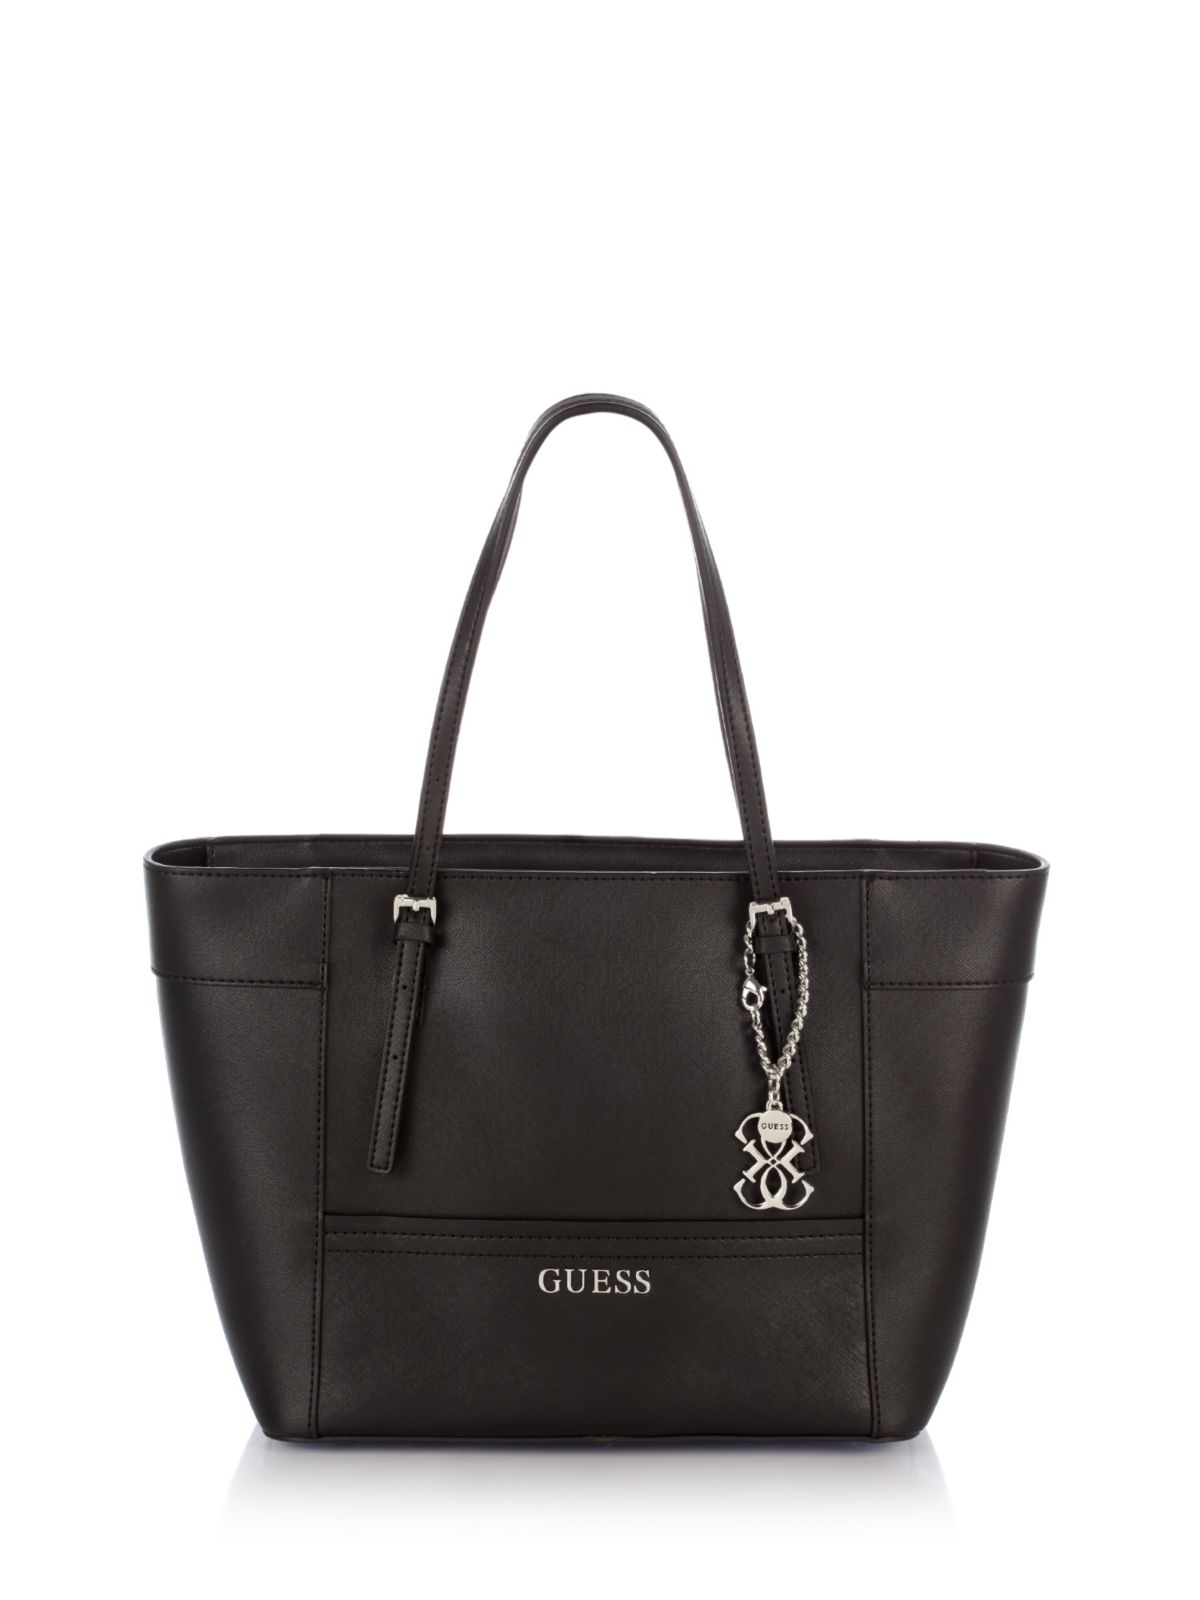 Guess Delaney Small Classic Tote Bag in Black | Lyst